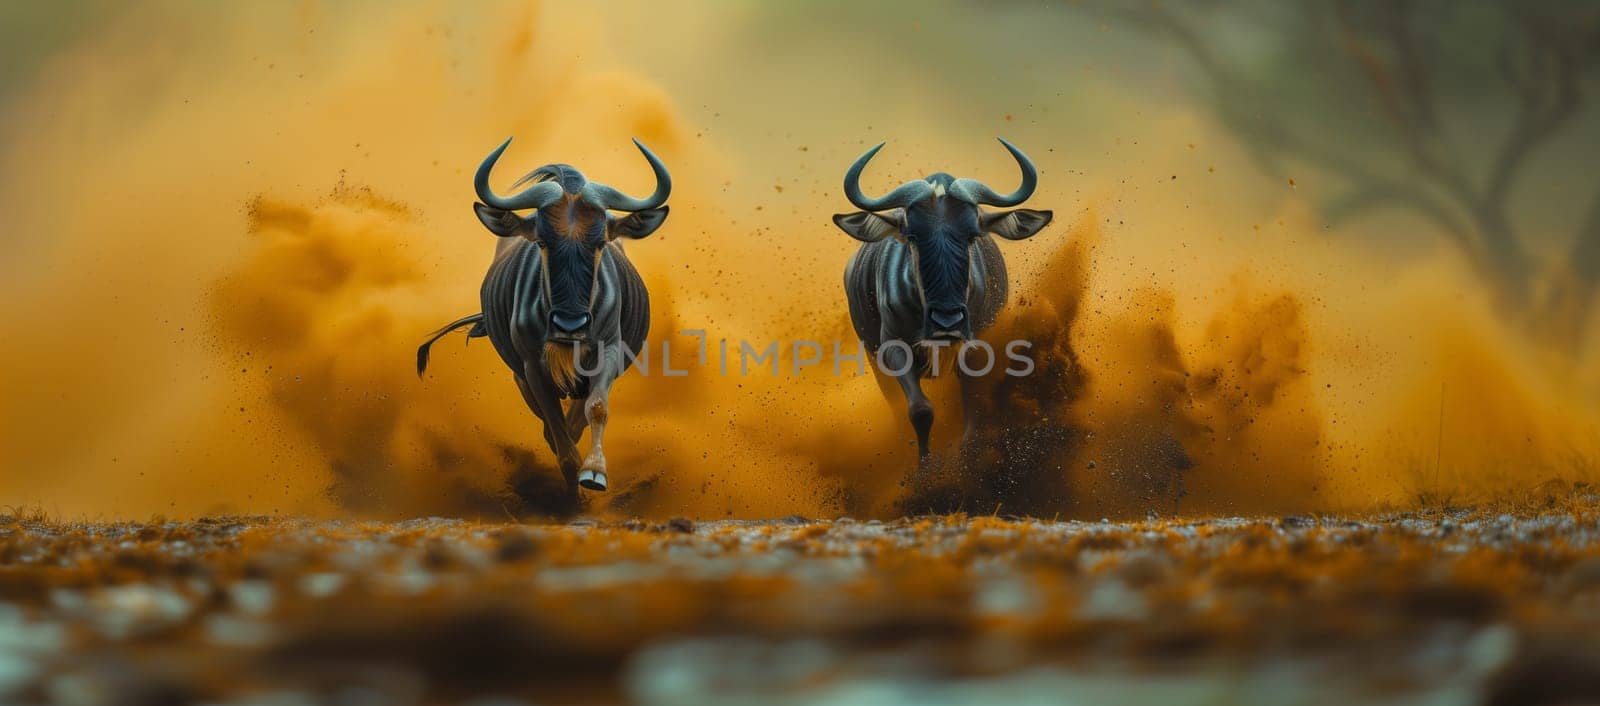 Two bulls are galloping on a bridge through a dusty landscape, while a membranewinged insect flits by. The natural scenery is filled with arthropods and plants, creating a picturesque scene